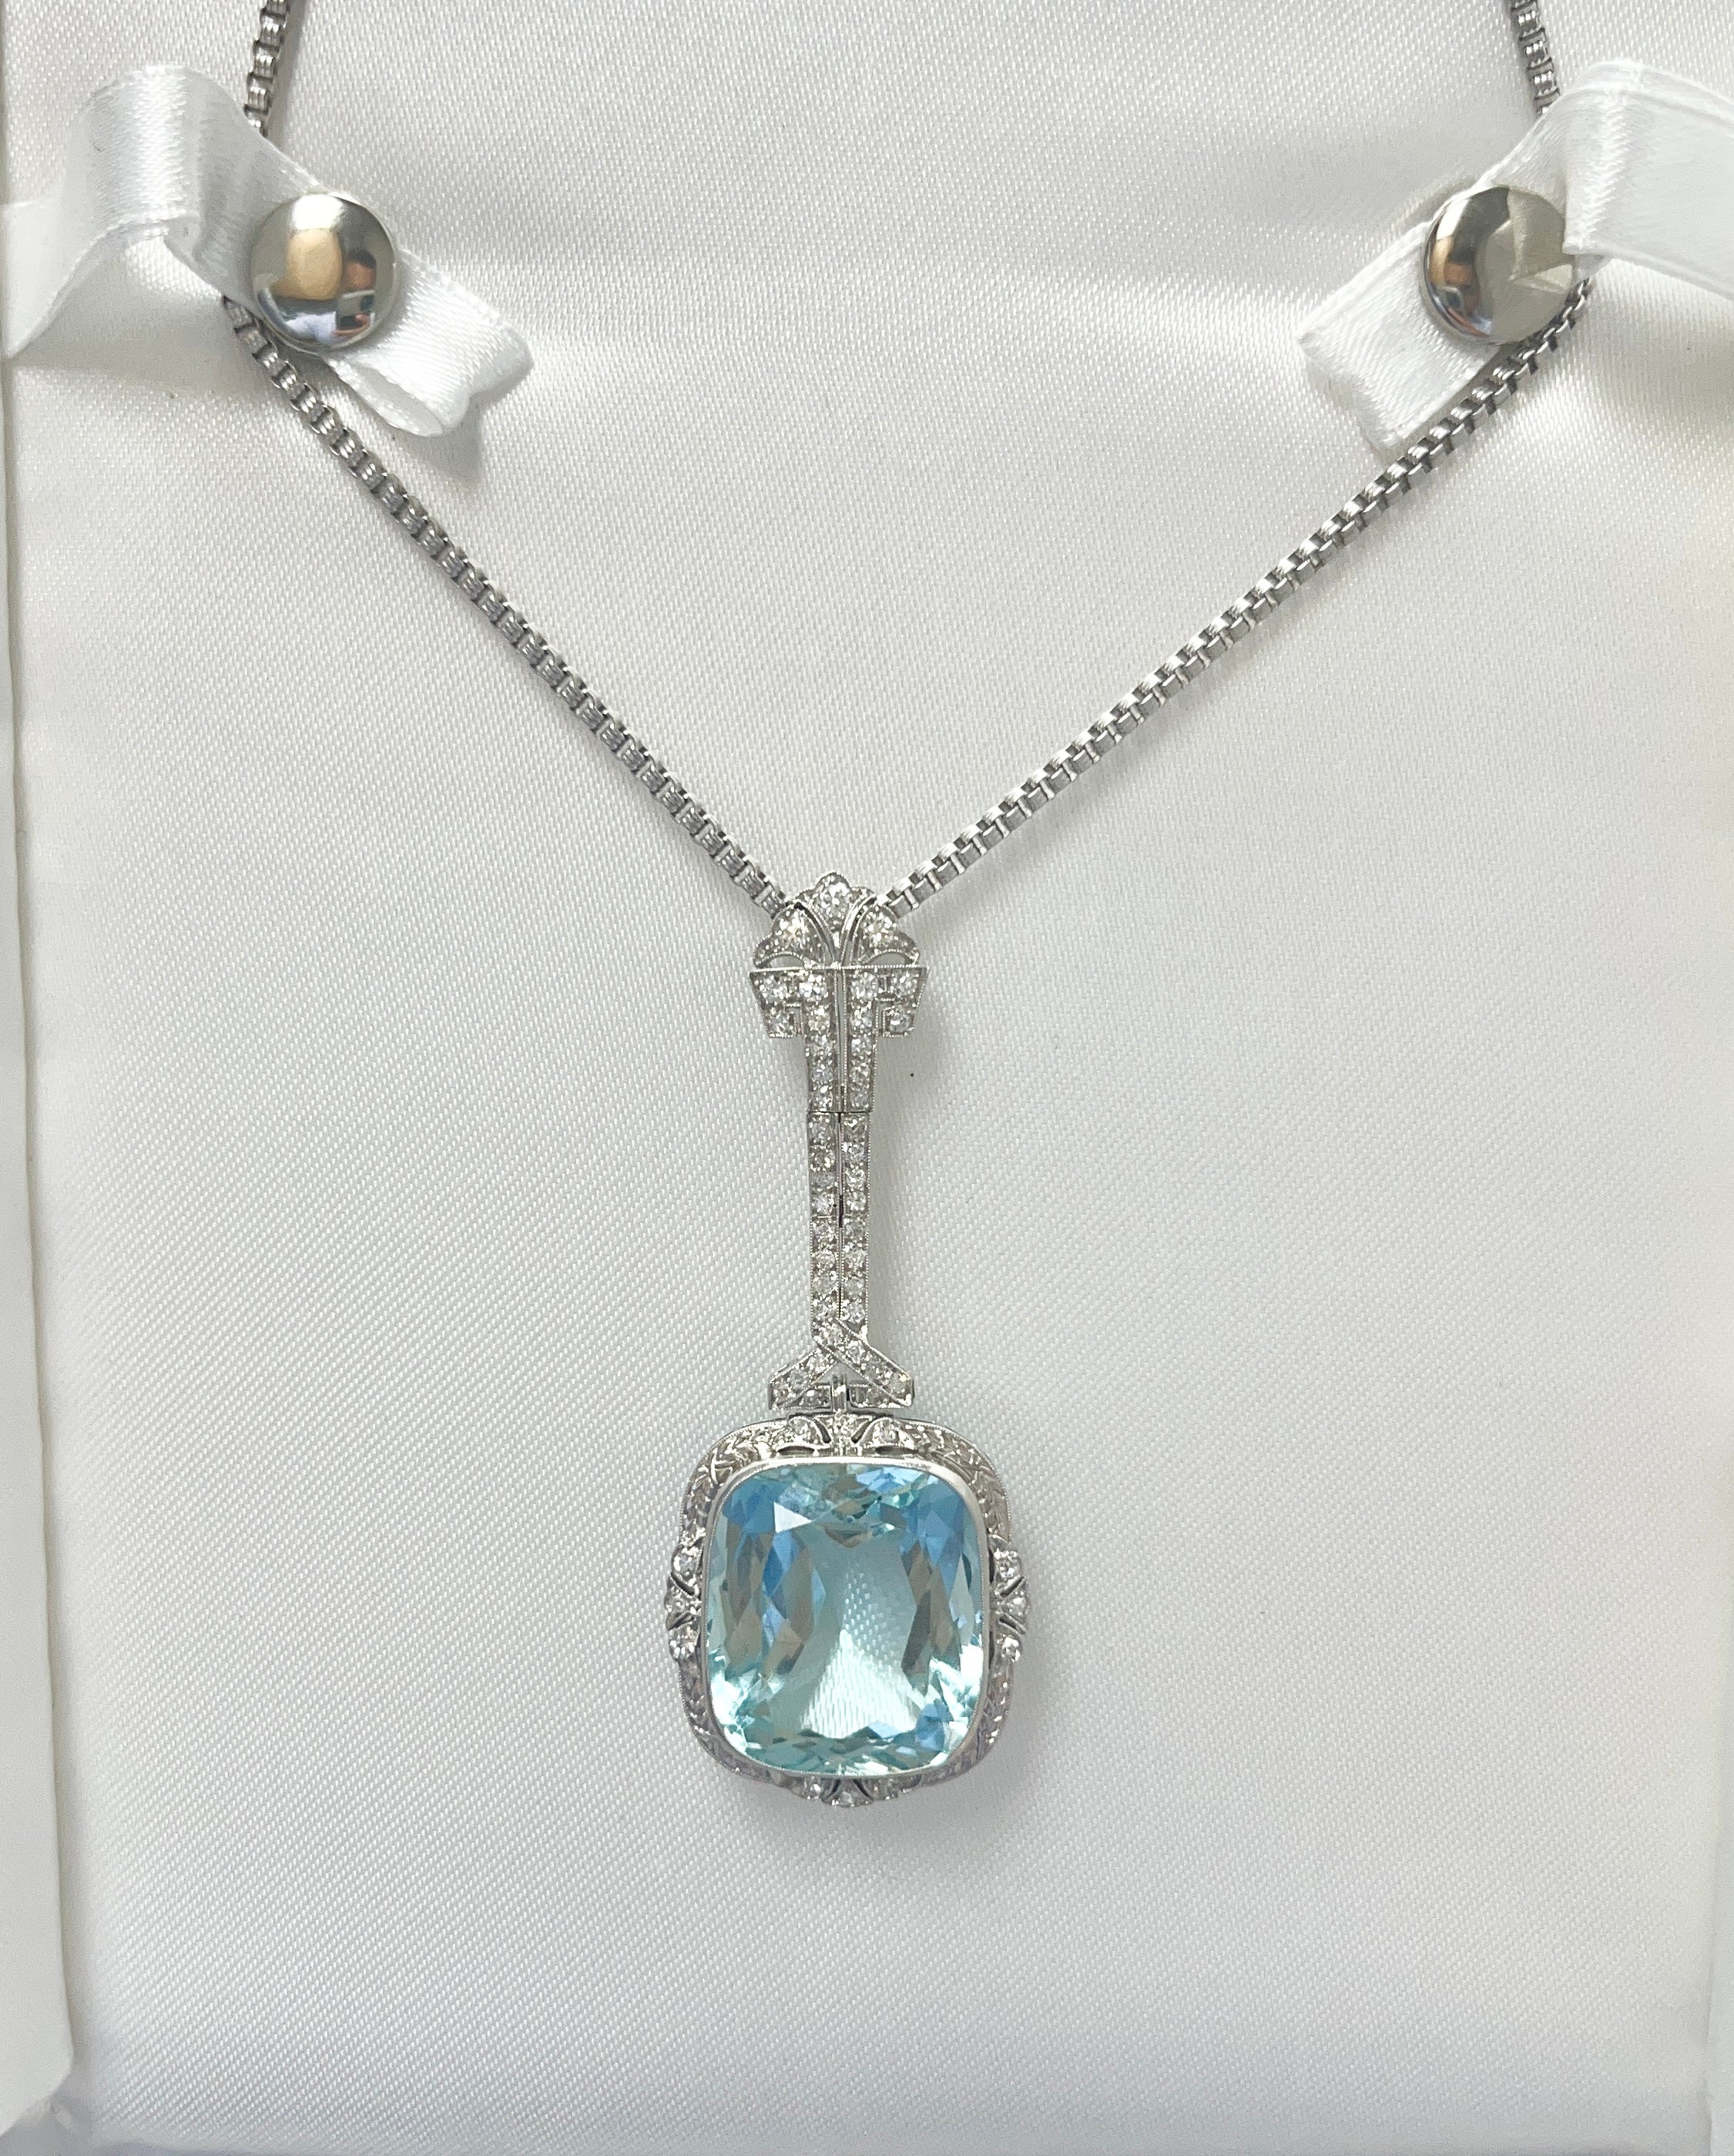 GIA-certified Art Deco Aquamarine Necklace, a mesmerizing blend of intricate filigree platinum setting, old euro cut diamonds, and a massive cushion cut aquamarine. This sophisticated piece balances subtle details with a vibrant blue center stone,